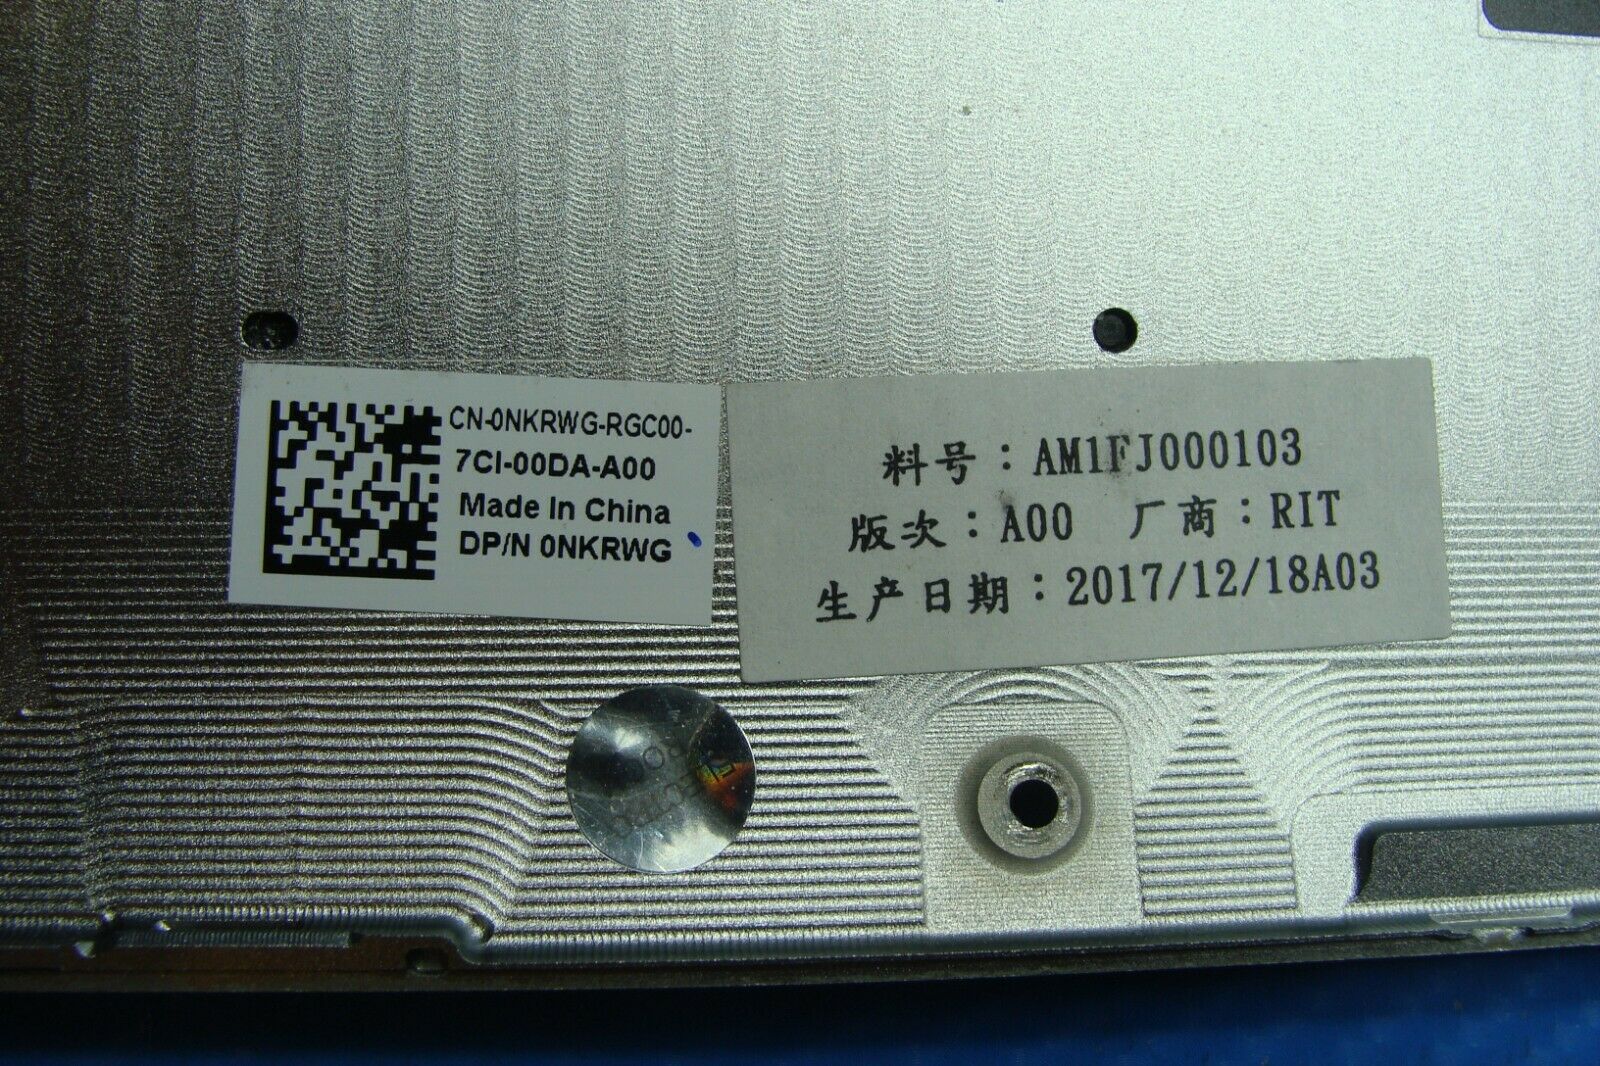 Dell XPS 13.3